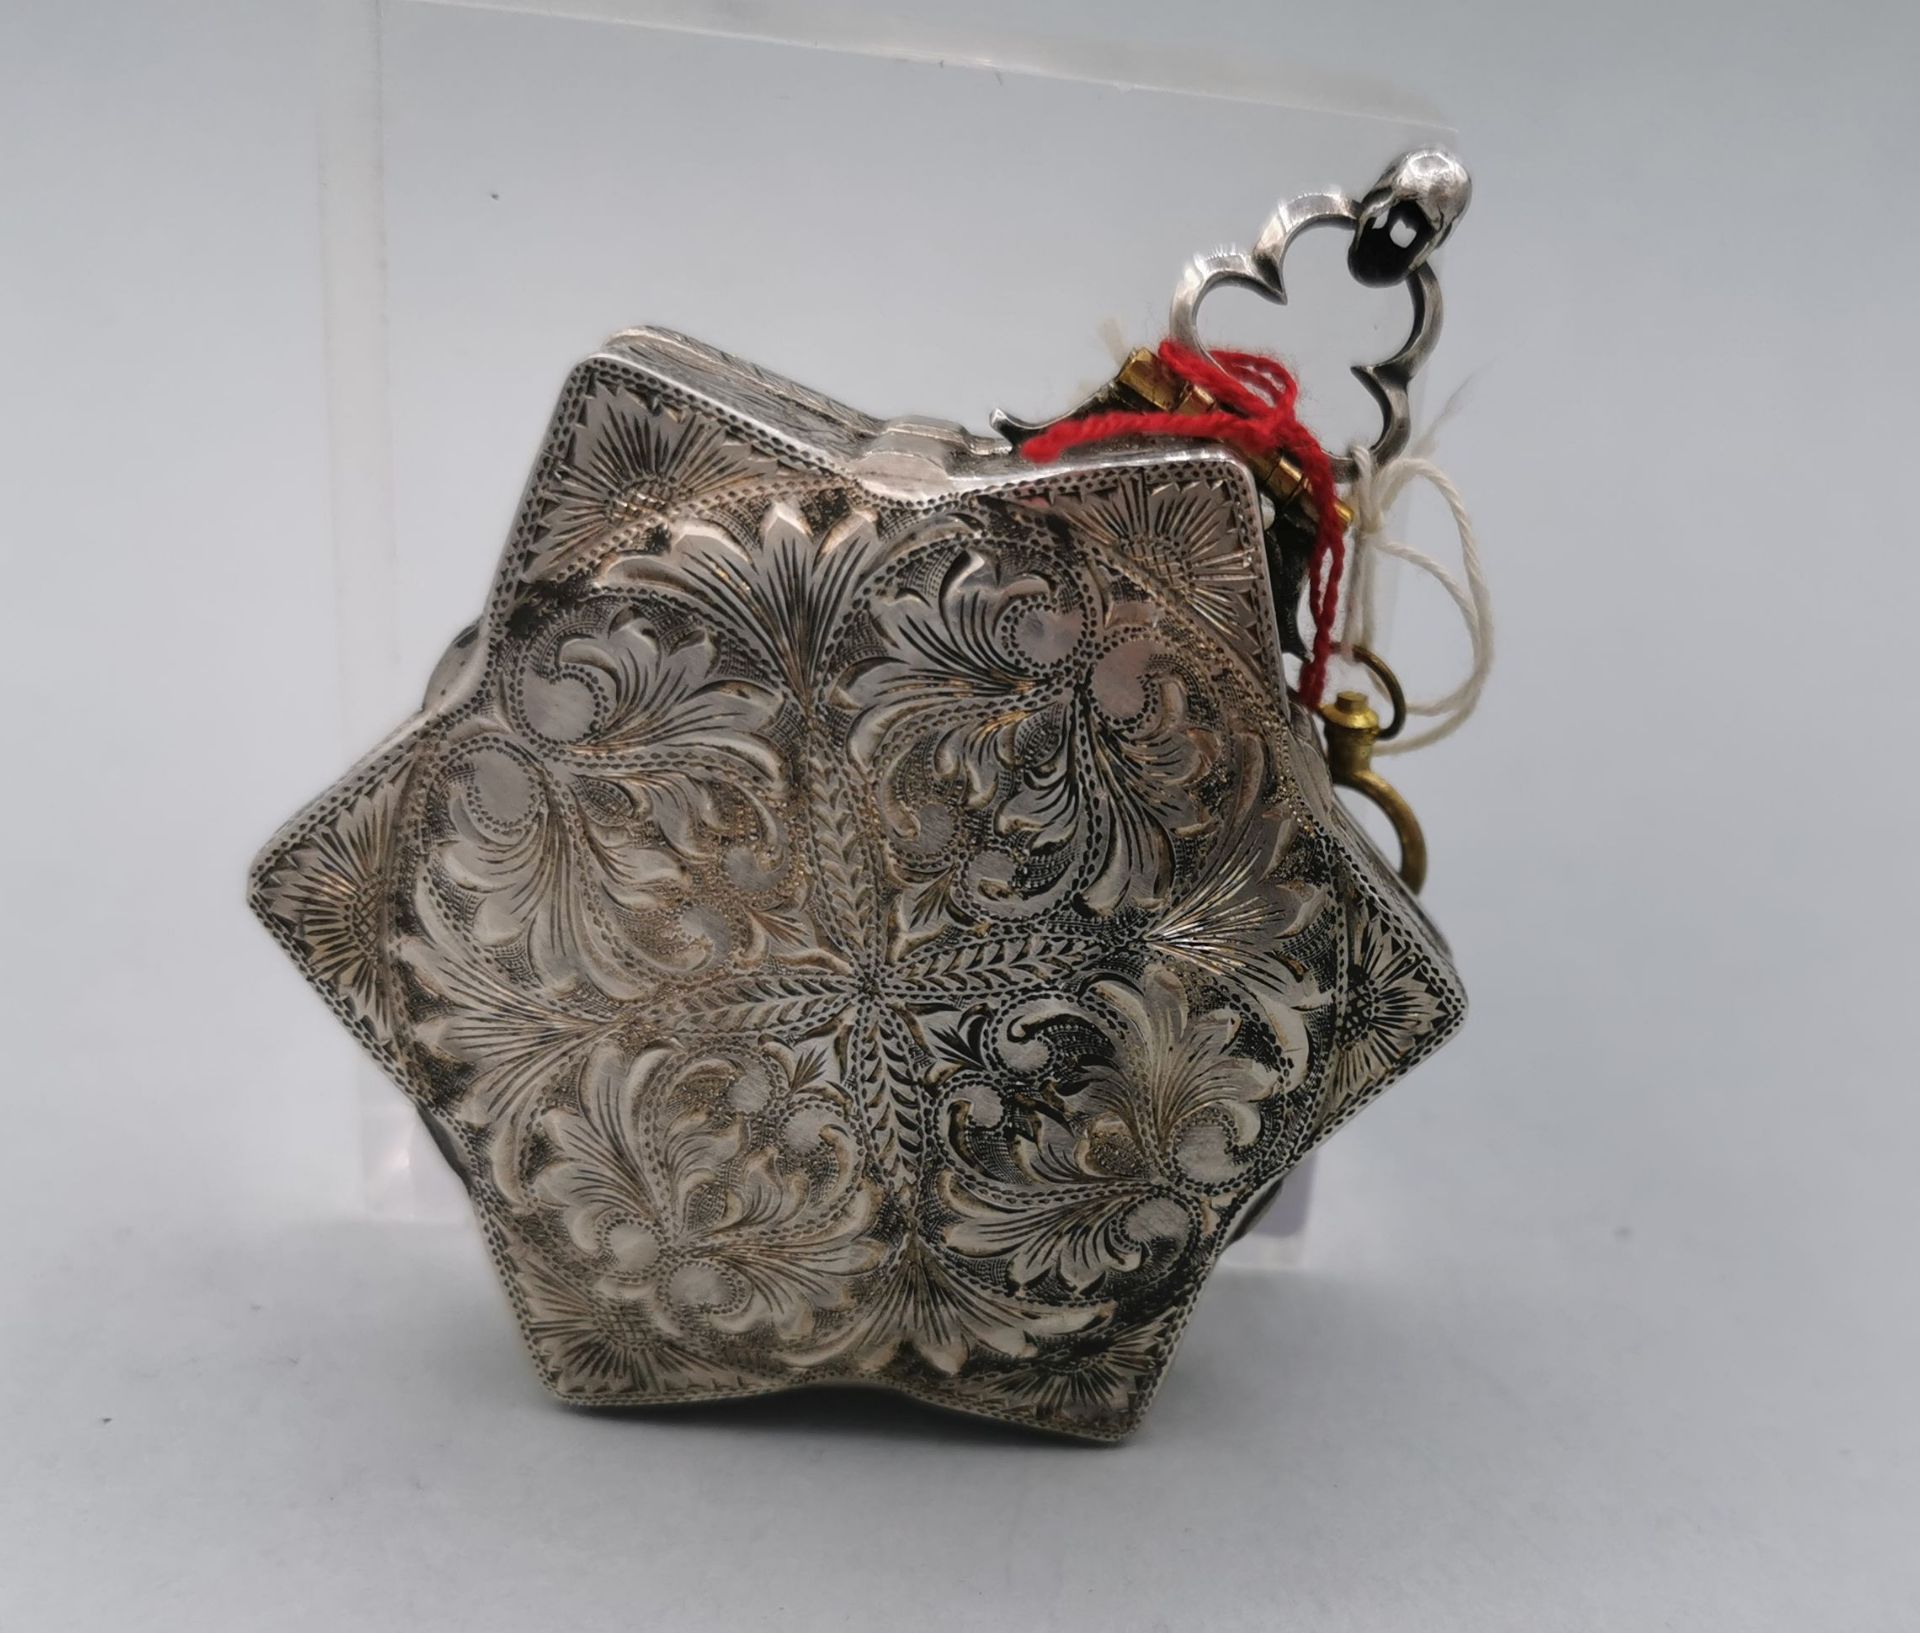 SPINDLE POCKET WATCH IN STAR-SHAPED CASE - Image 5 of 10